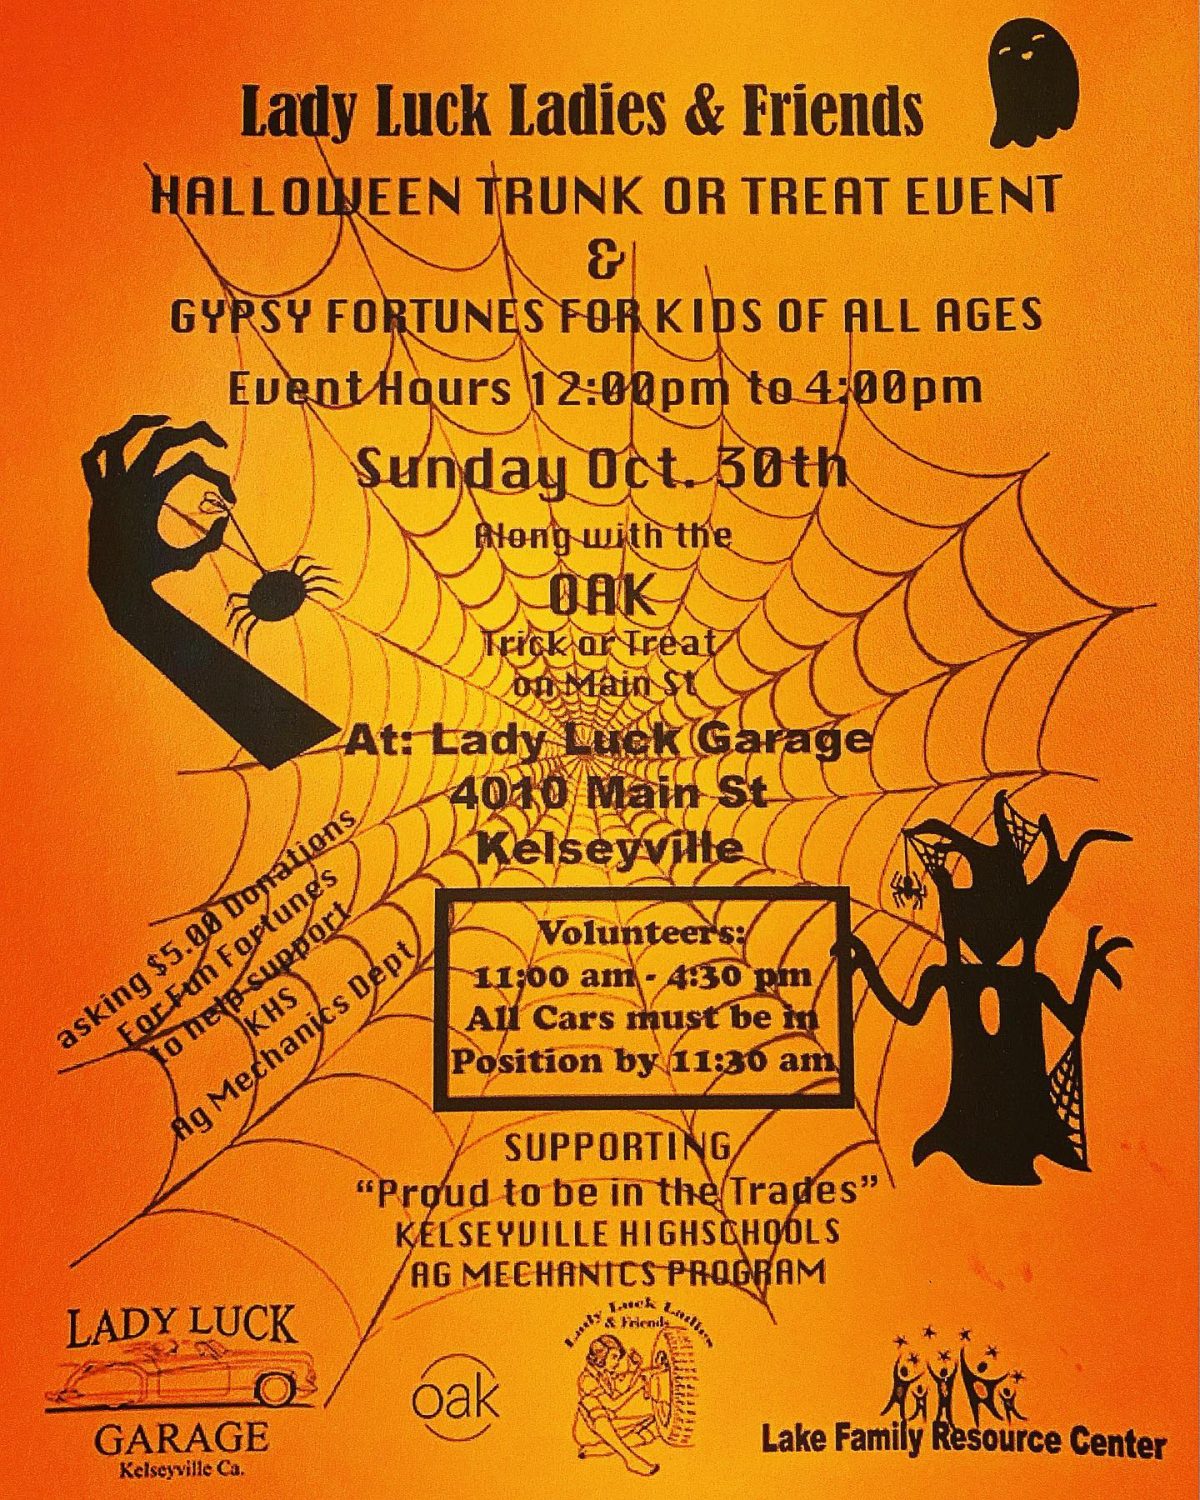 Lady Luck Trunk or Treat Car Show